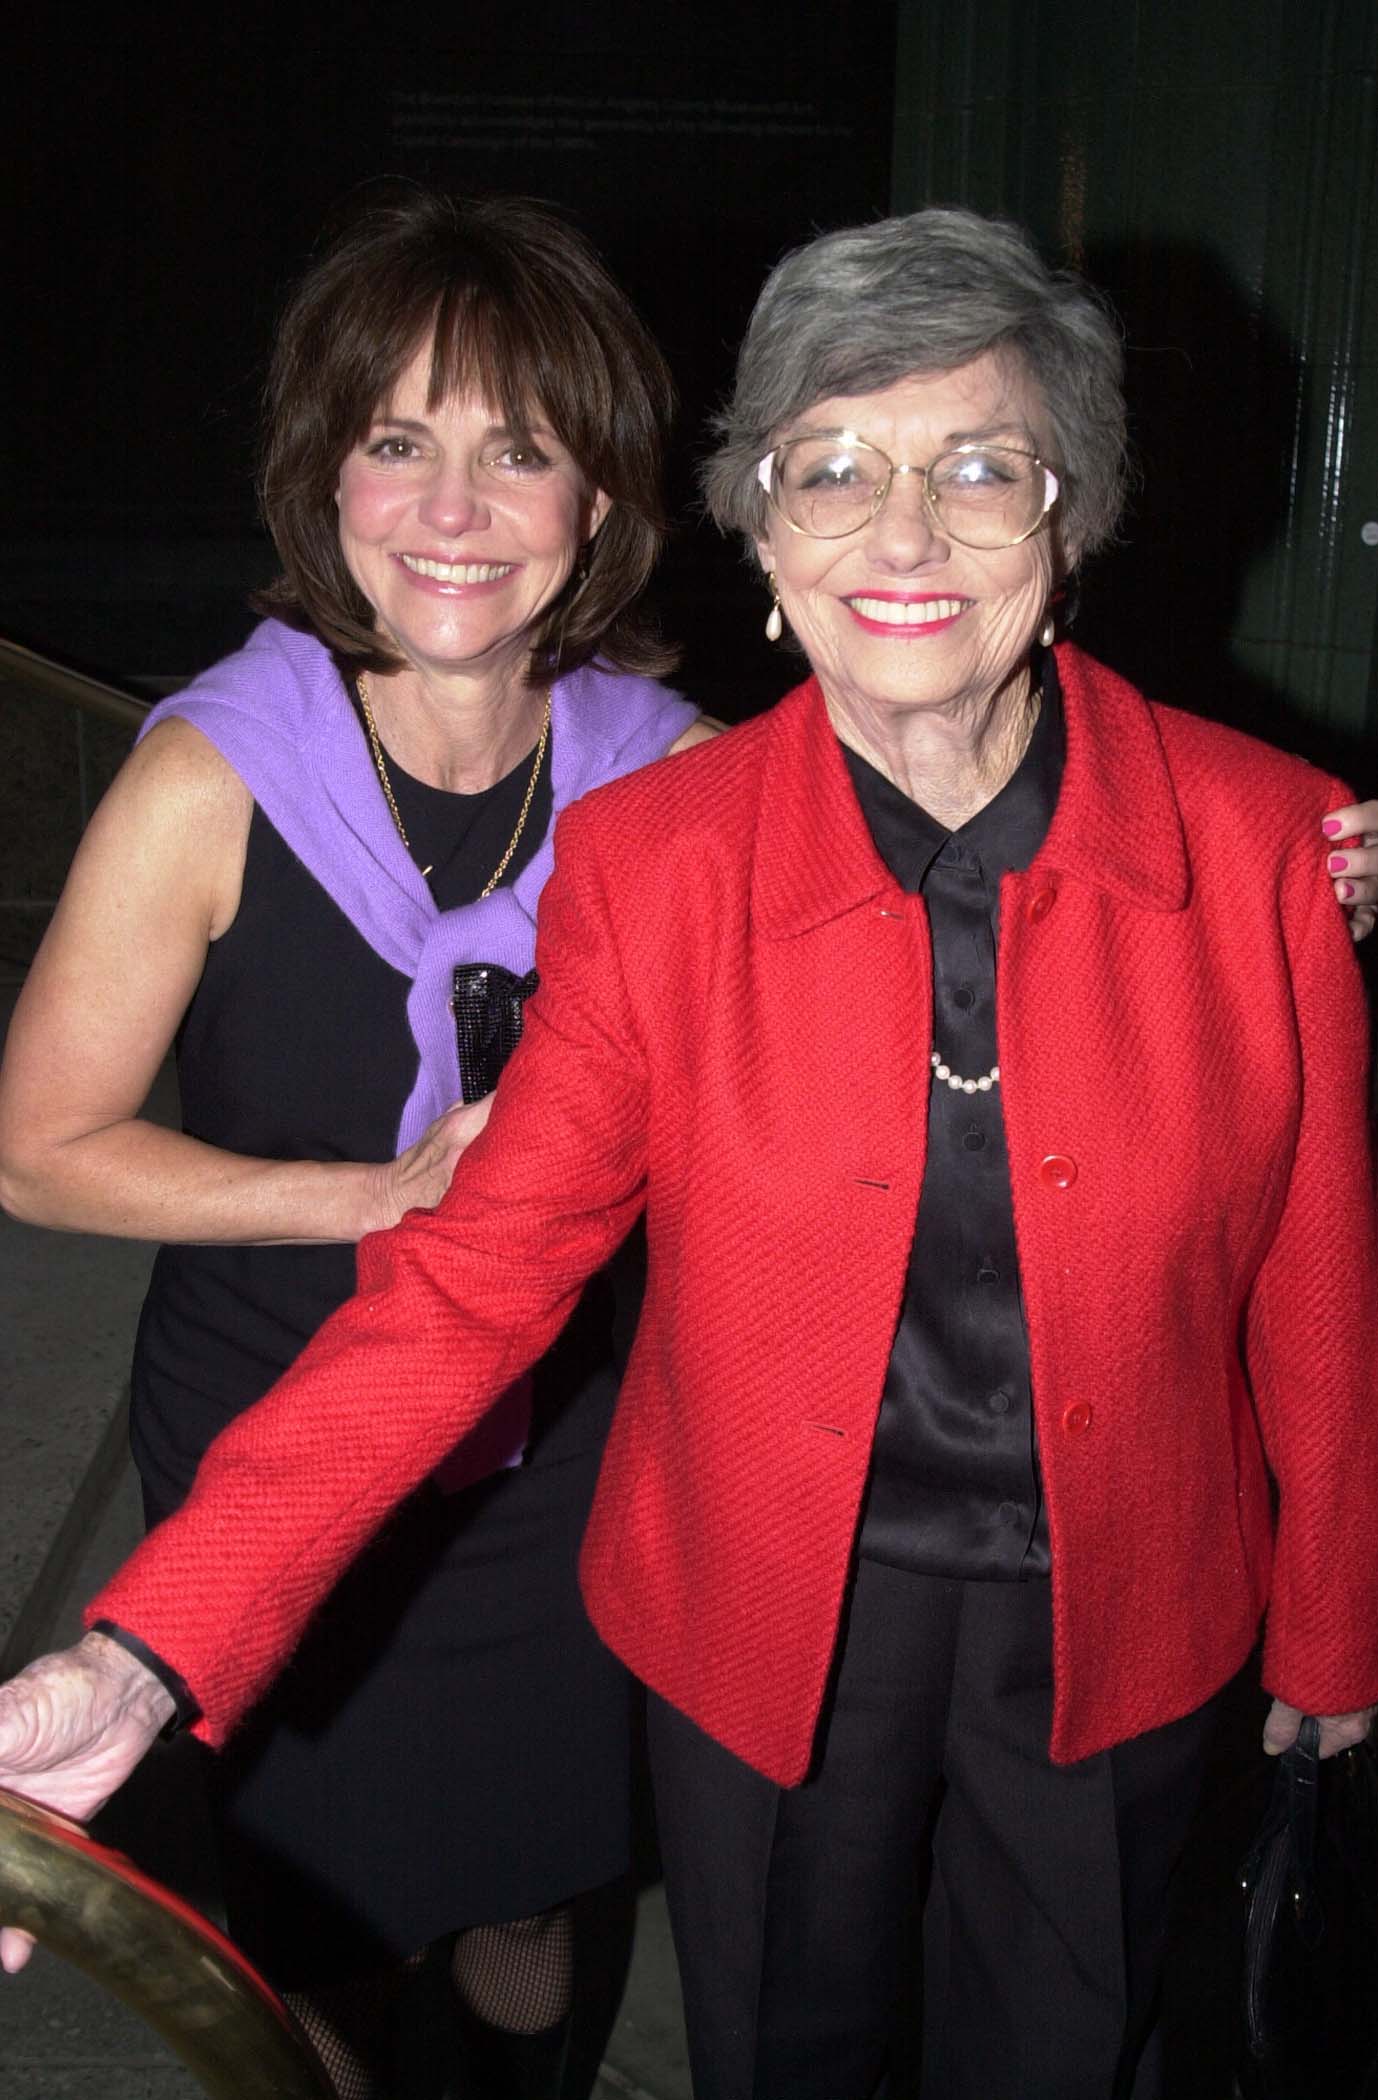 Sally Field and her mother Margaret Field at the premiere of the movie, "Beautiful" on September 25, 2000 ┃Source: Getty Images